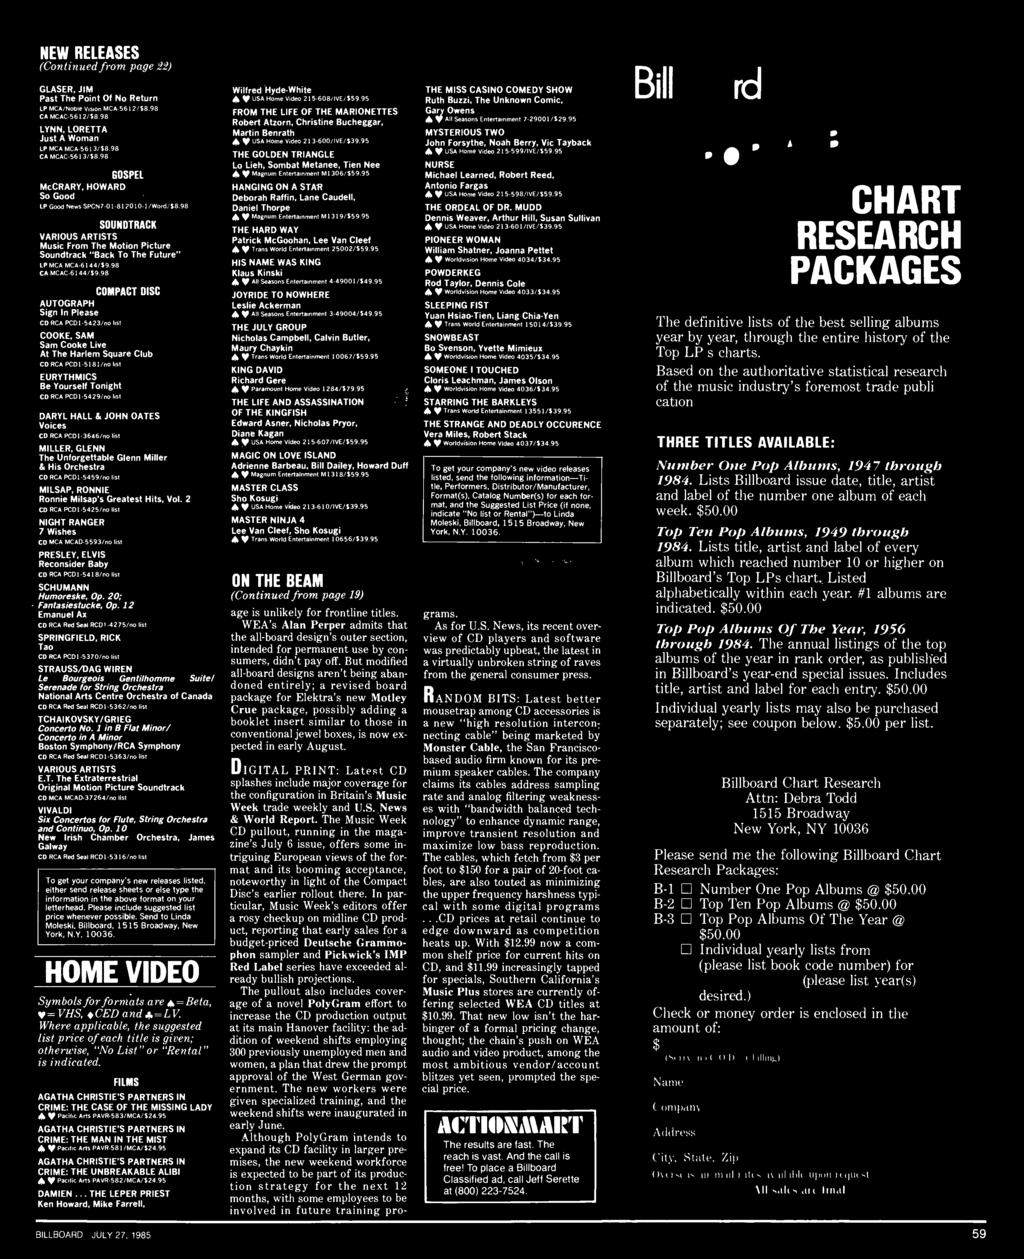 NEW RELEASES (Continued from page 22) GLASER, JIM Past The Point Of No Return LP MCA /Noble Vision MCA -5612/$8.98 CA MCAC 5612 58.98 LYNN, LORETTA Just A Woman LP MCA MCA -5613/58.